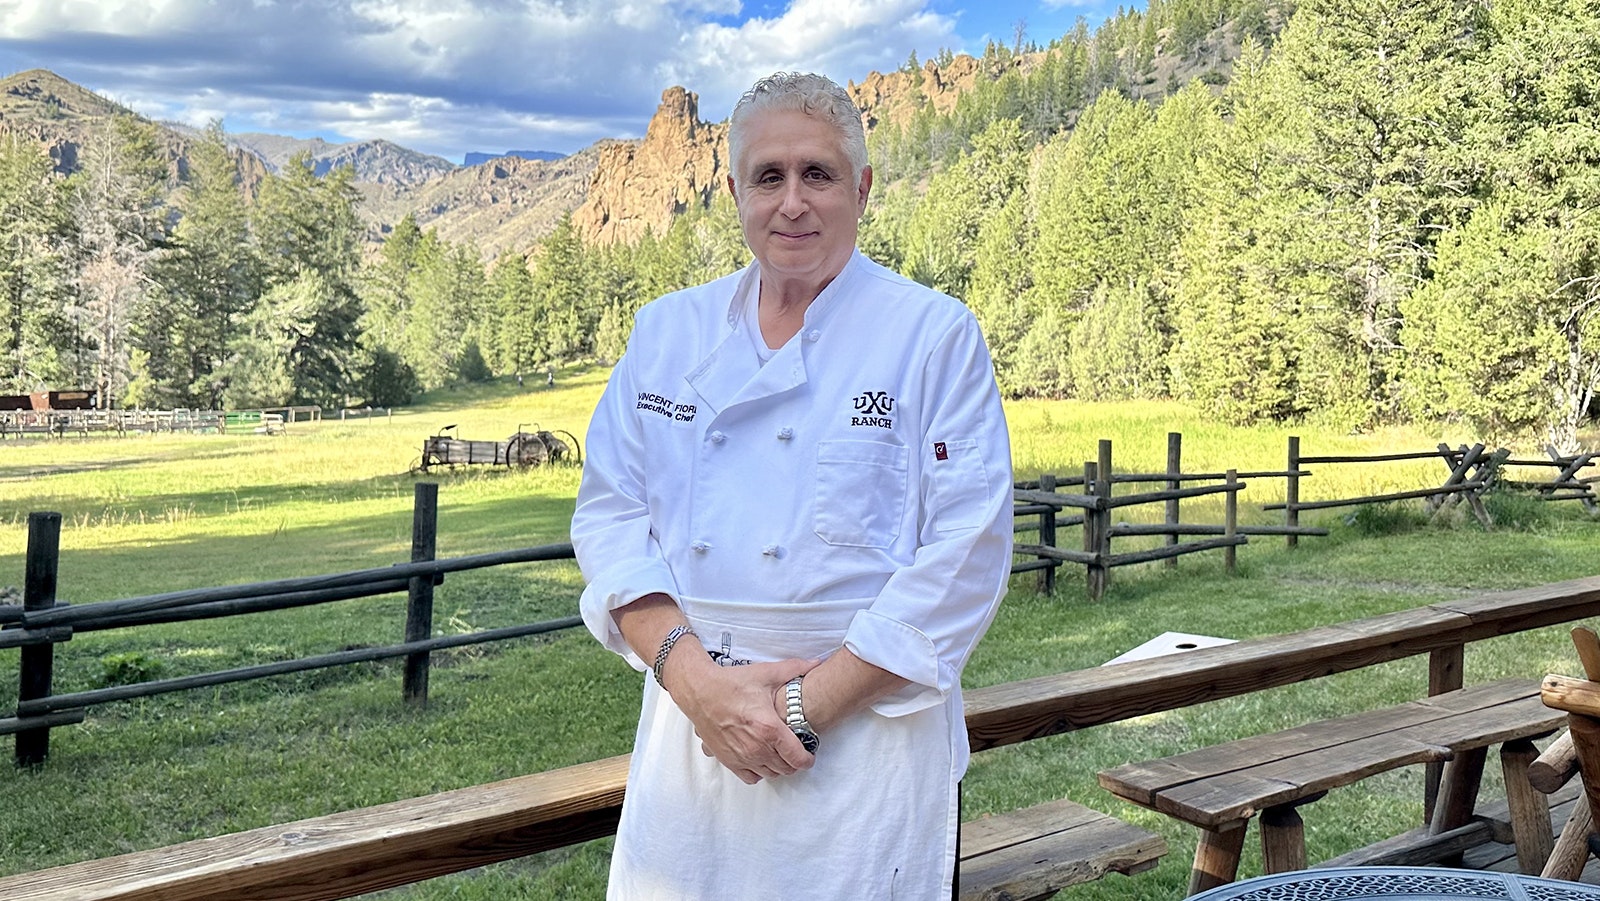 Chef Vince Fiore poses in front of the stunning vista seen from the UXU Ranch's dining room. Fiore's summer of cooking is creating a dining destination on the route between Cody and Yellowstone National Park, and he hopes to do so much more in the future.